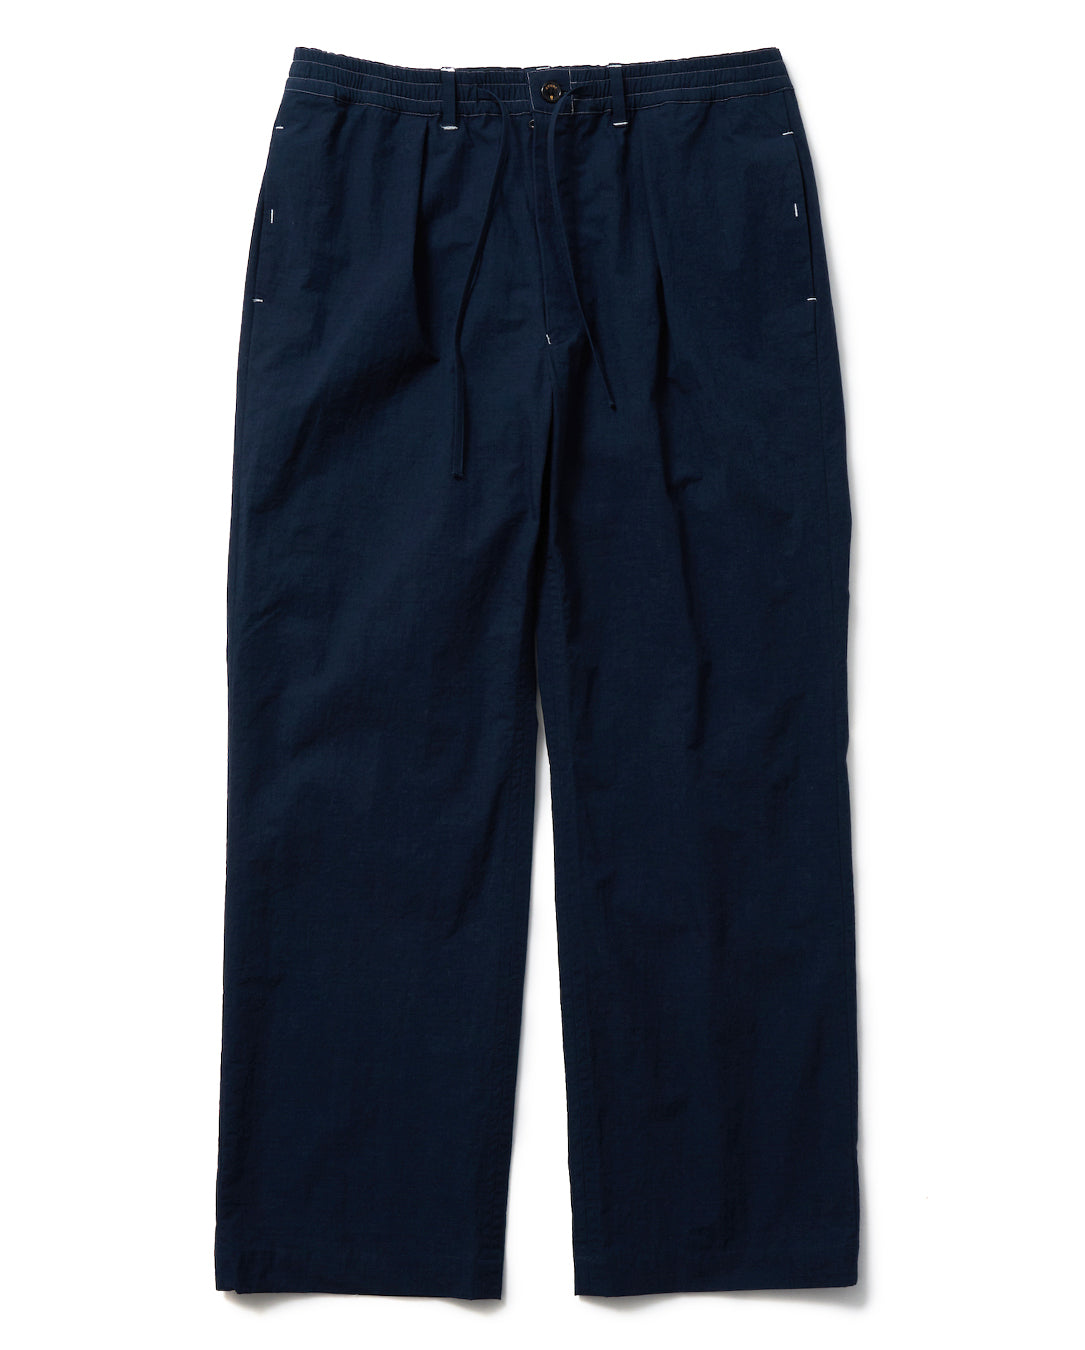 M.K Middle Trousers navy